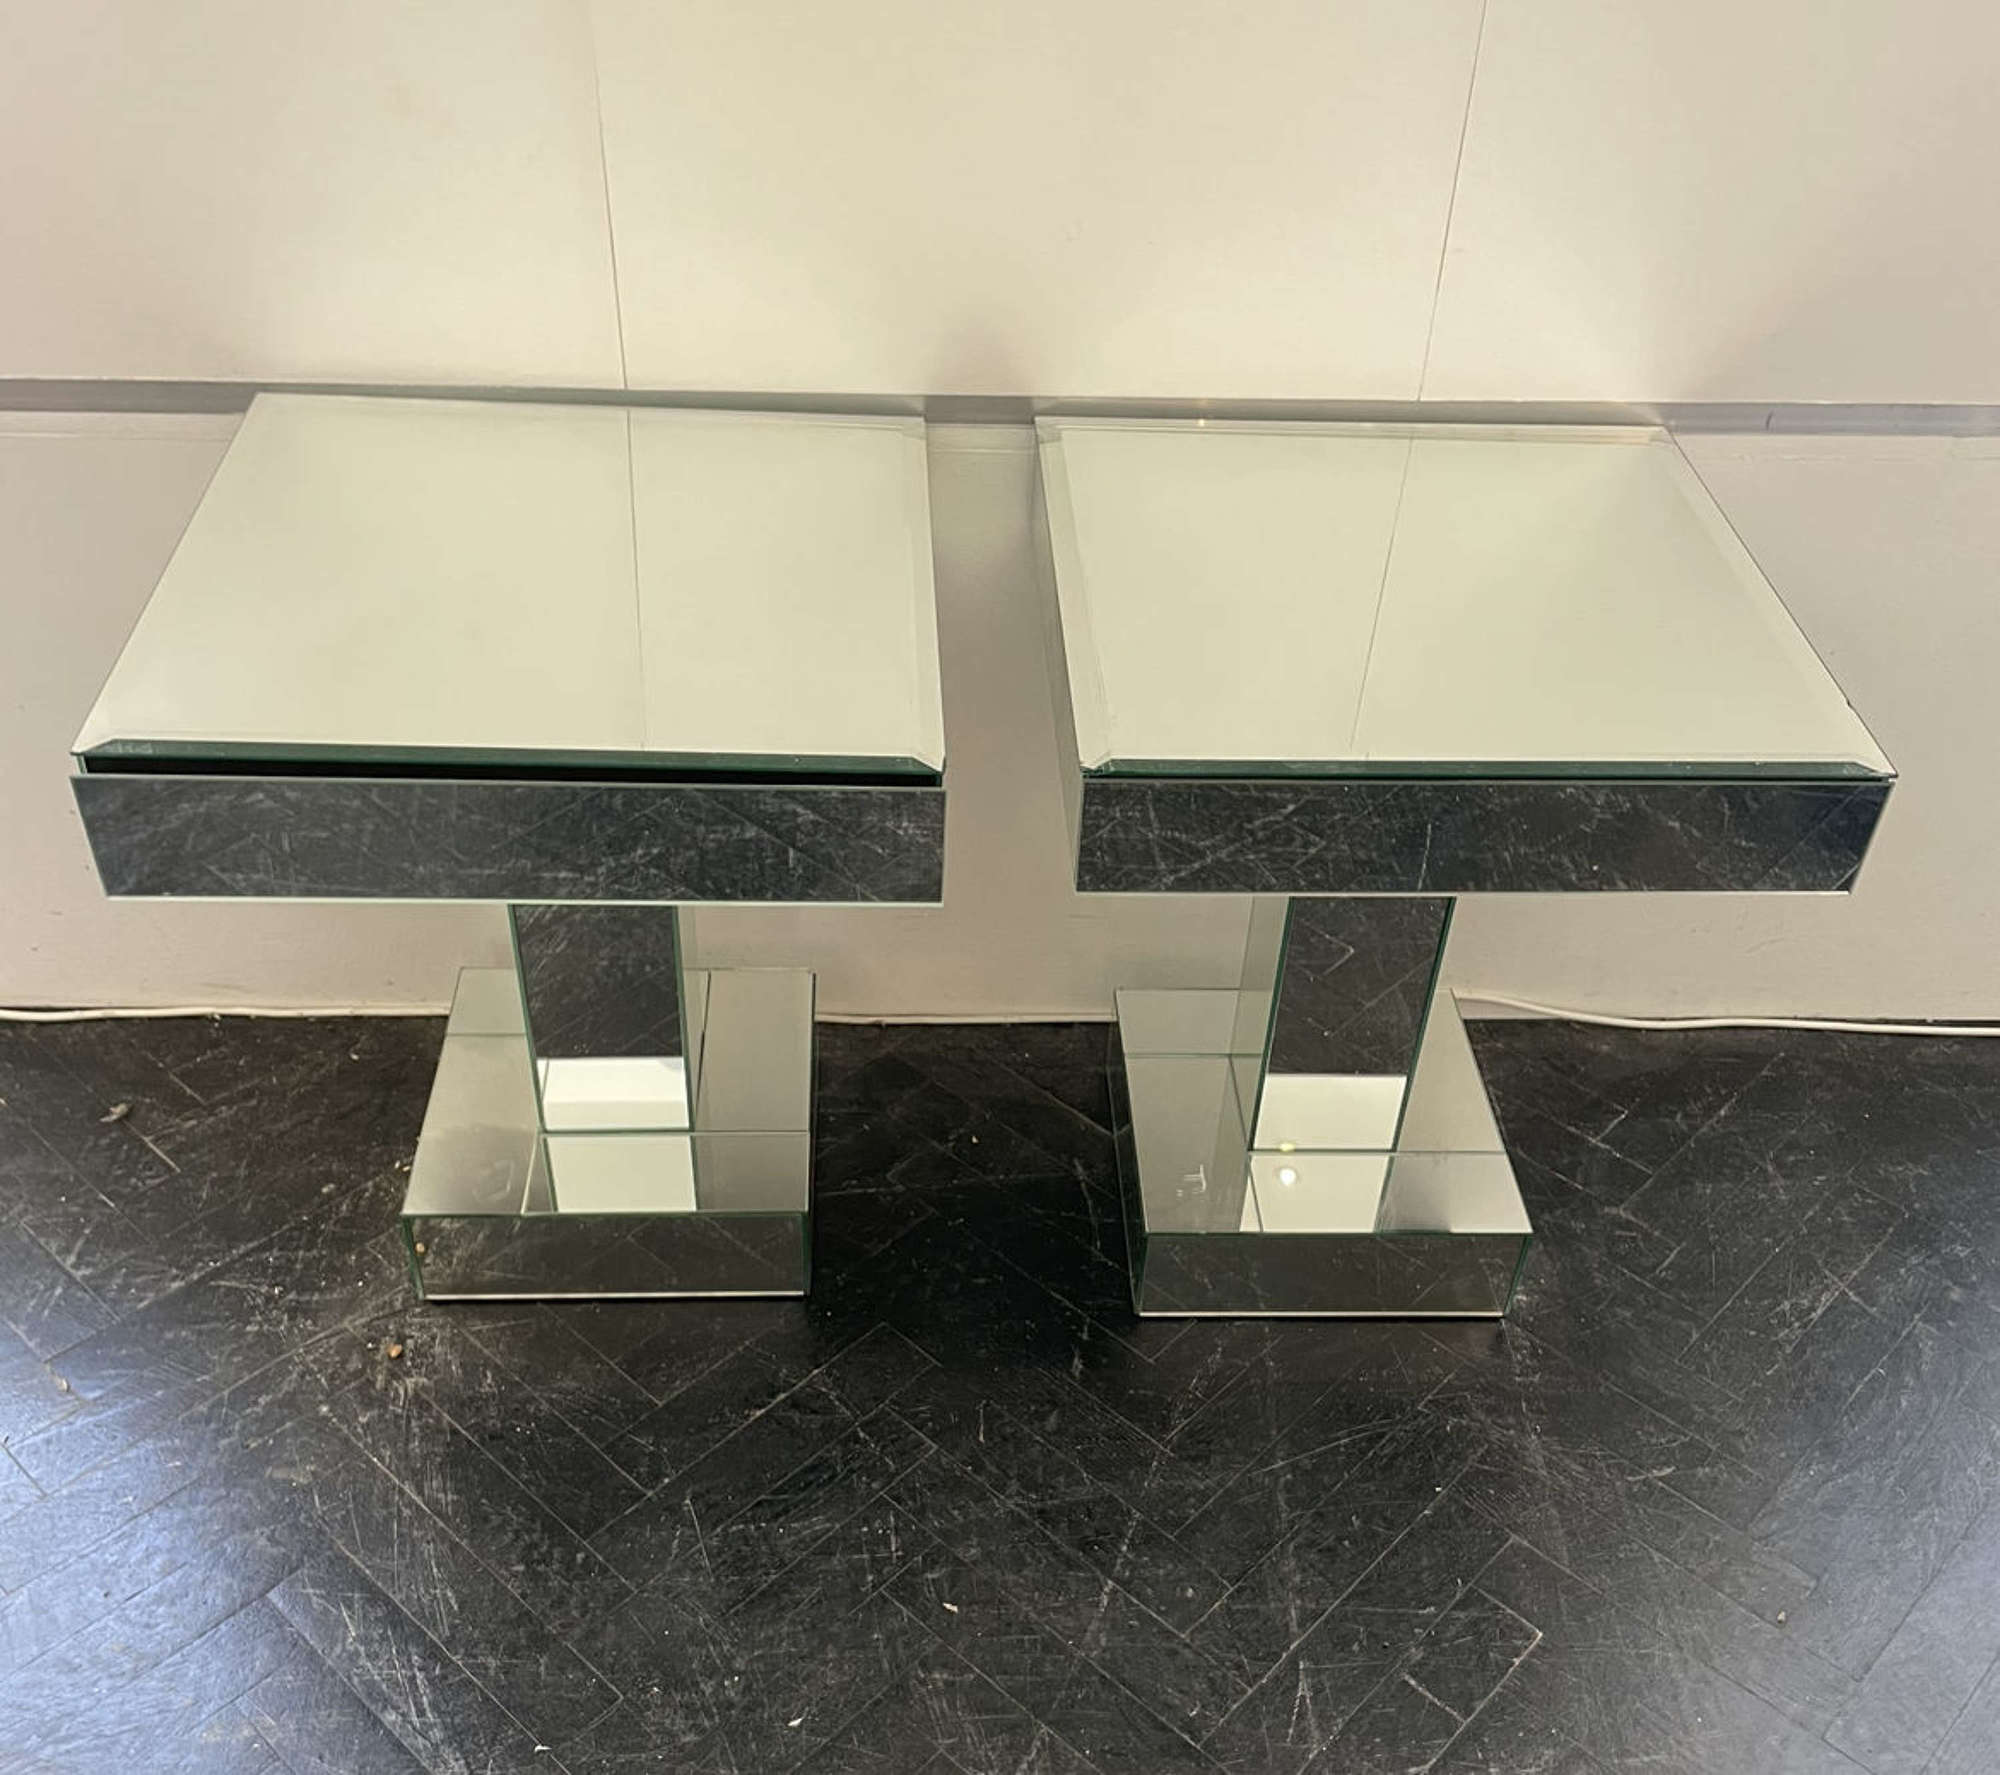 Pair of Mirrored Side Tables